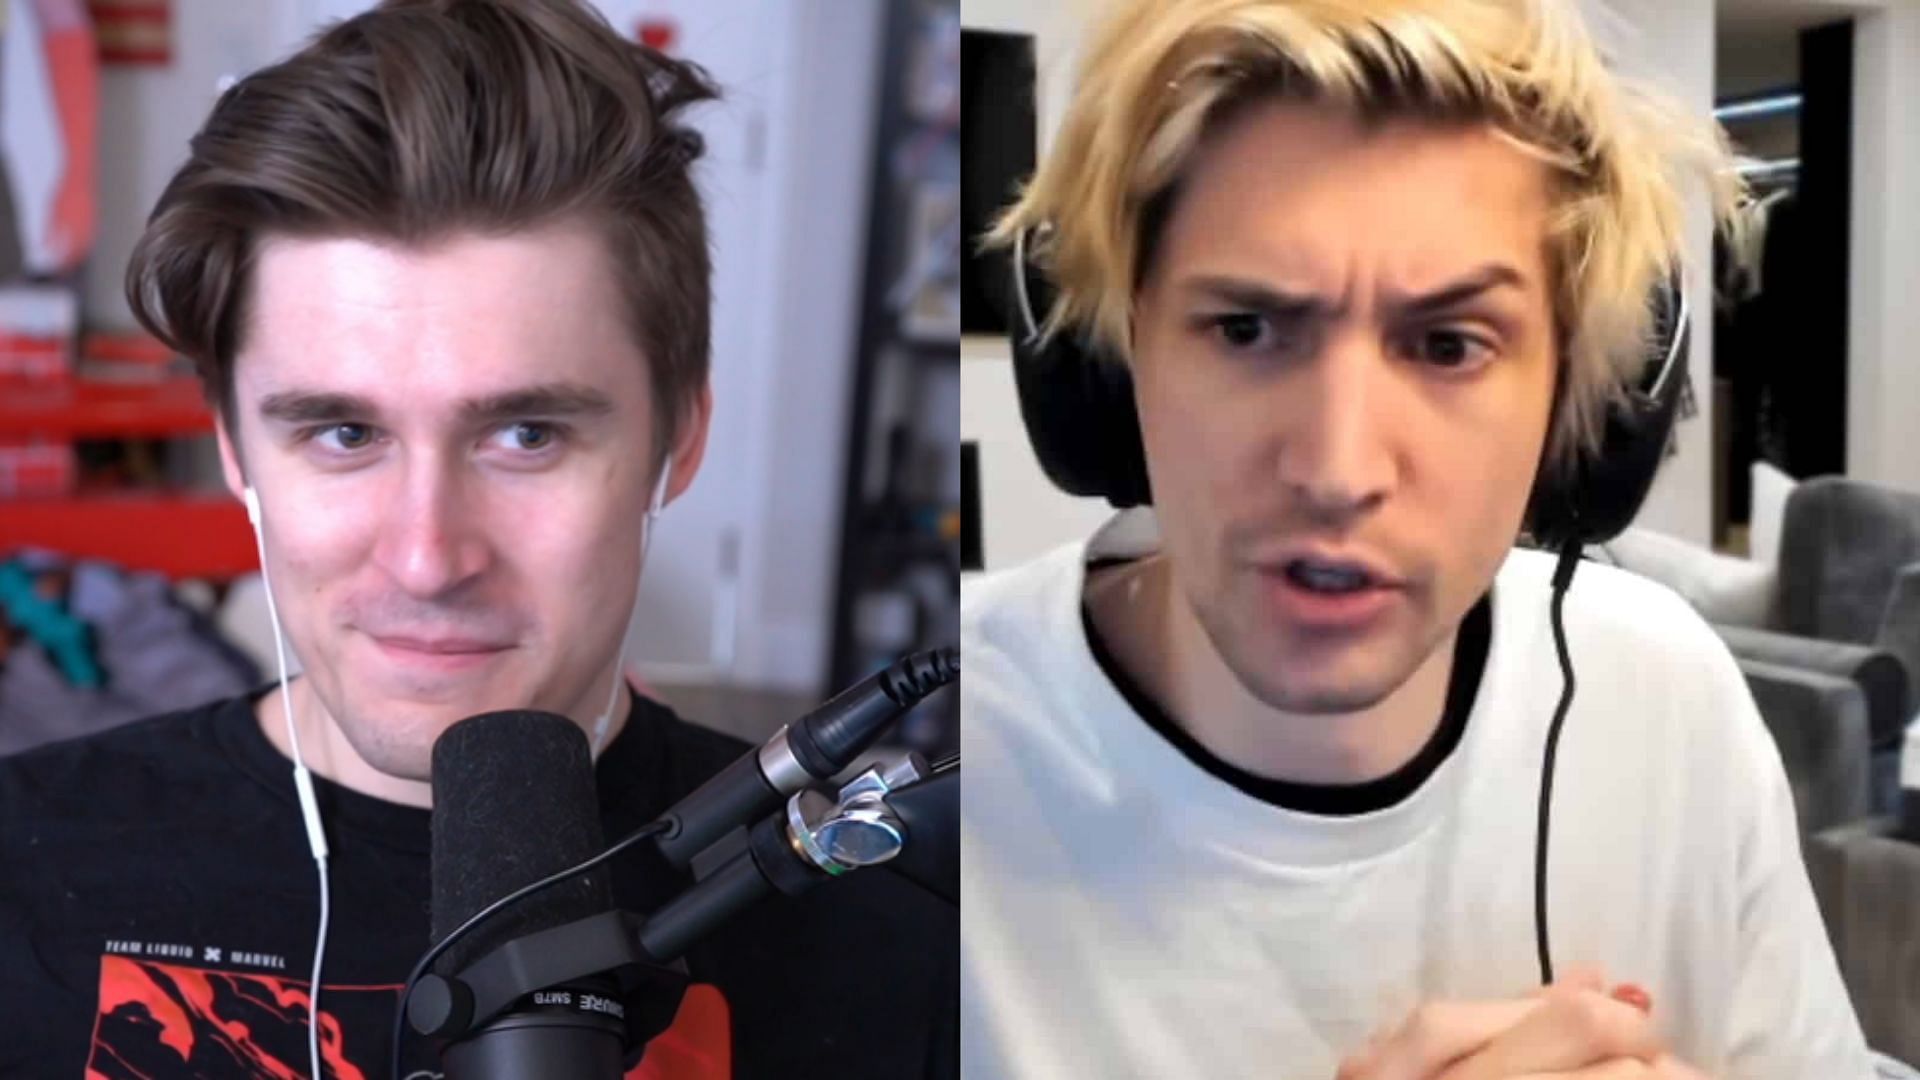 Streamer Awards 2022: ‘xQc robbed’ controversy explained